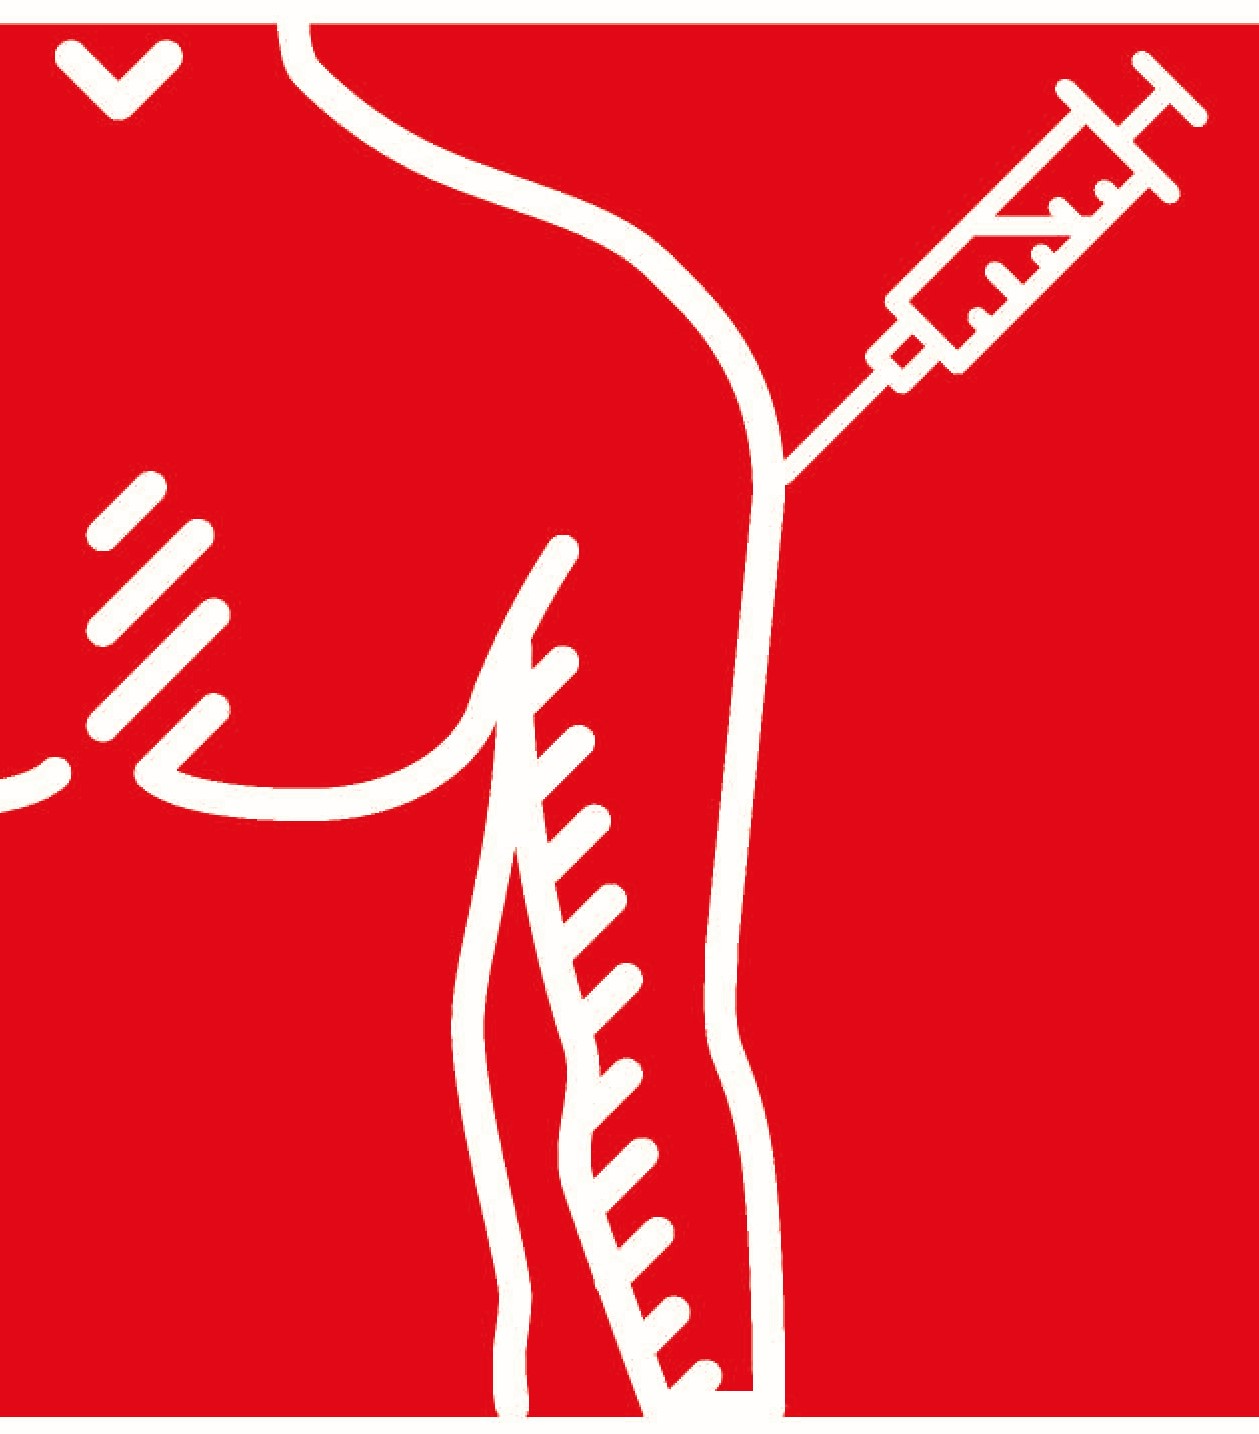 Red and white clip art image of a person getting a shot in the arm